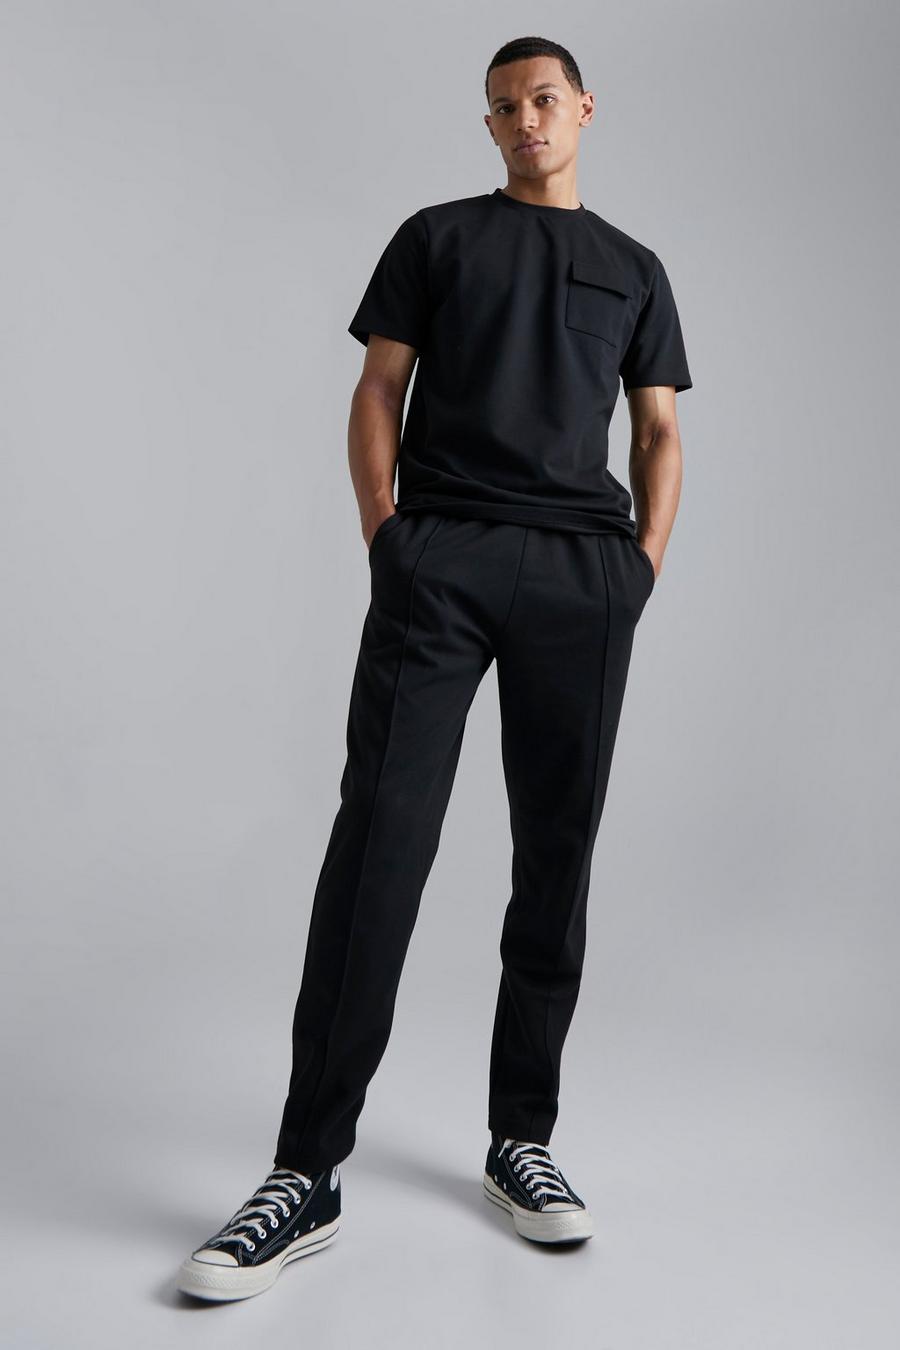 Black Tall Slim Fit T-shirt And Tapered Jogger Set